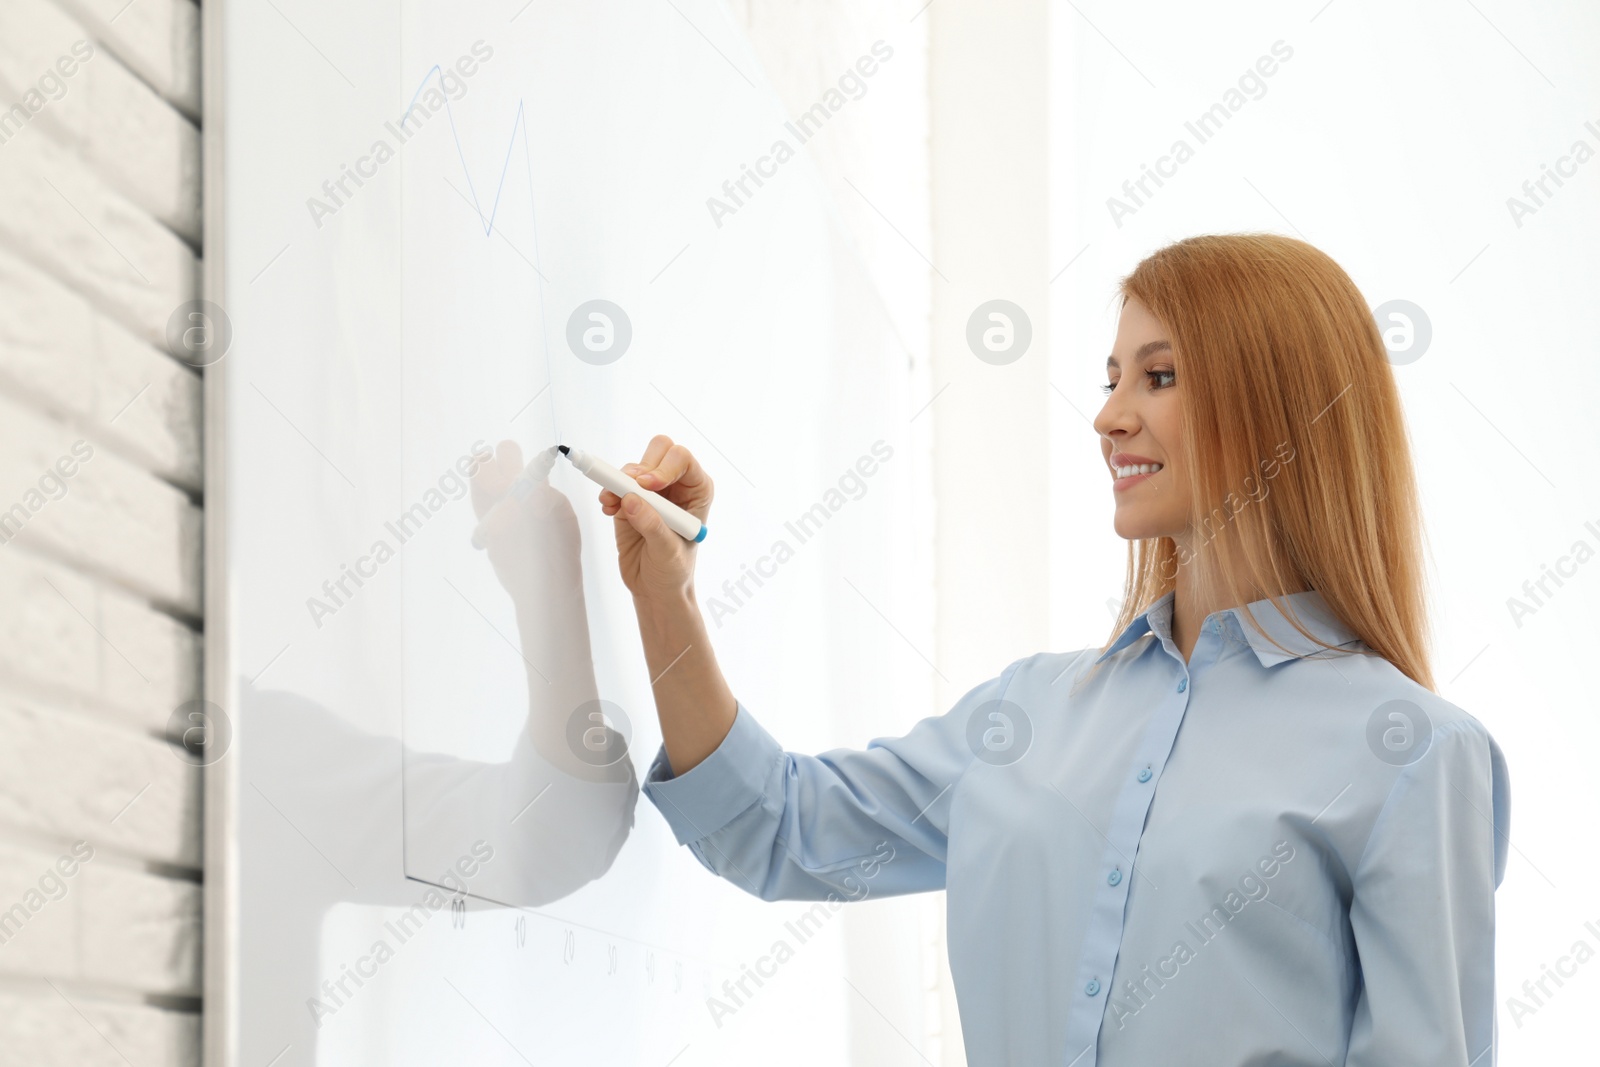 Photo of Professional business trainer near whiteboard in office